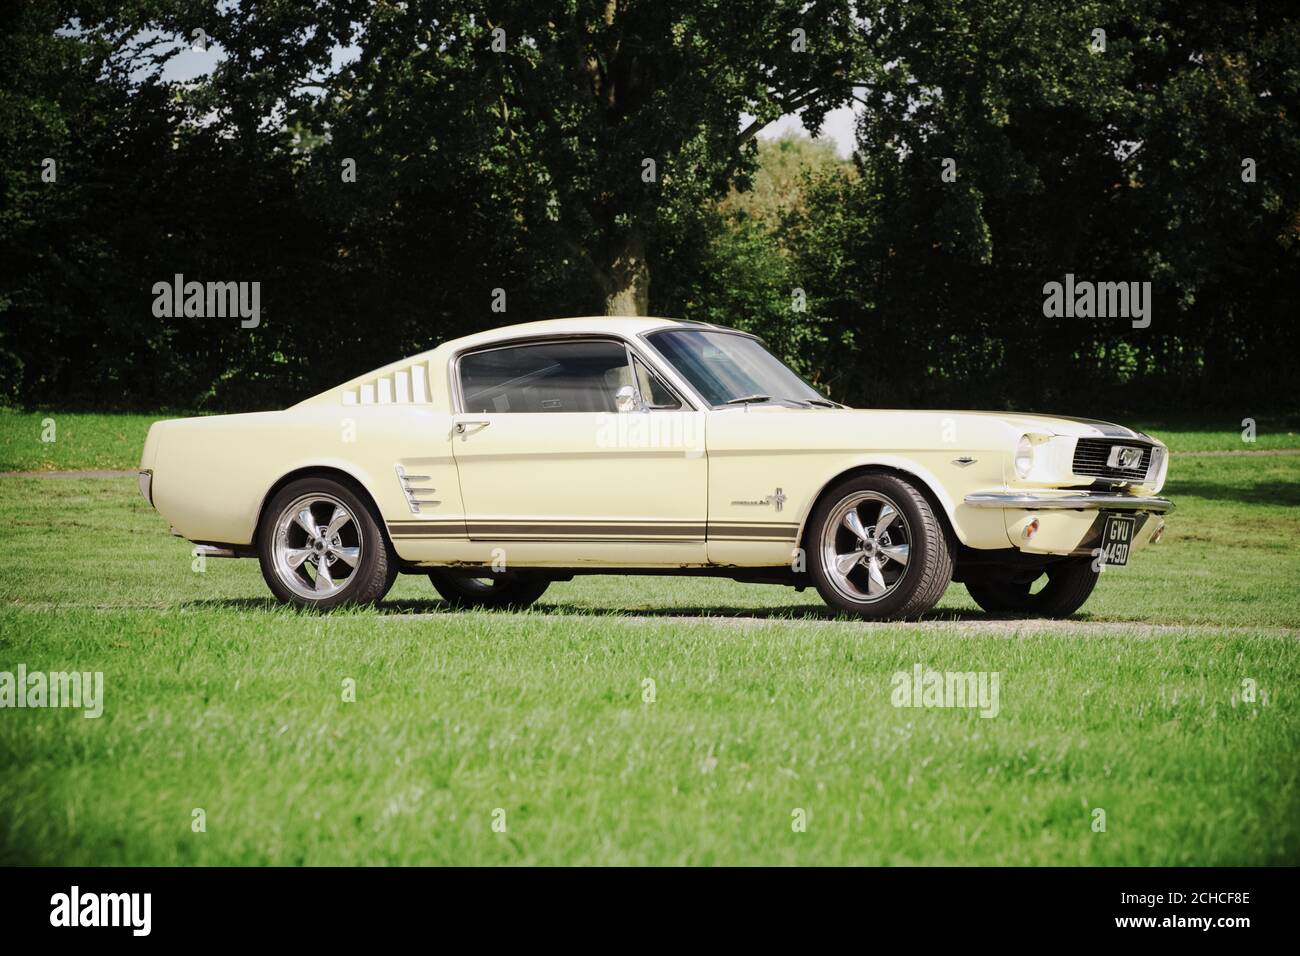 Ford Mustang 1966 classic car Fastback version Stock Photo